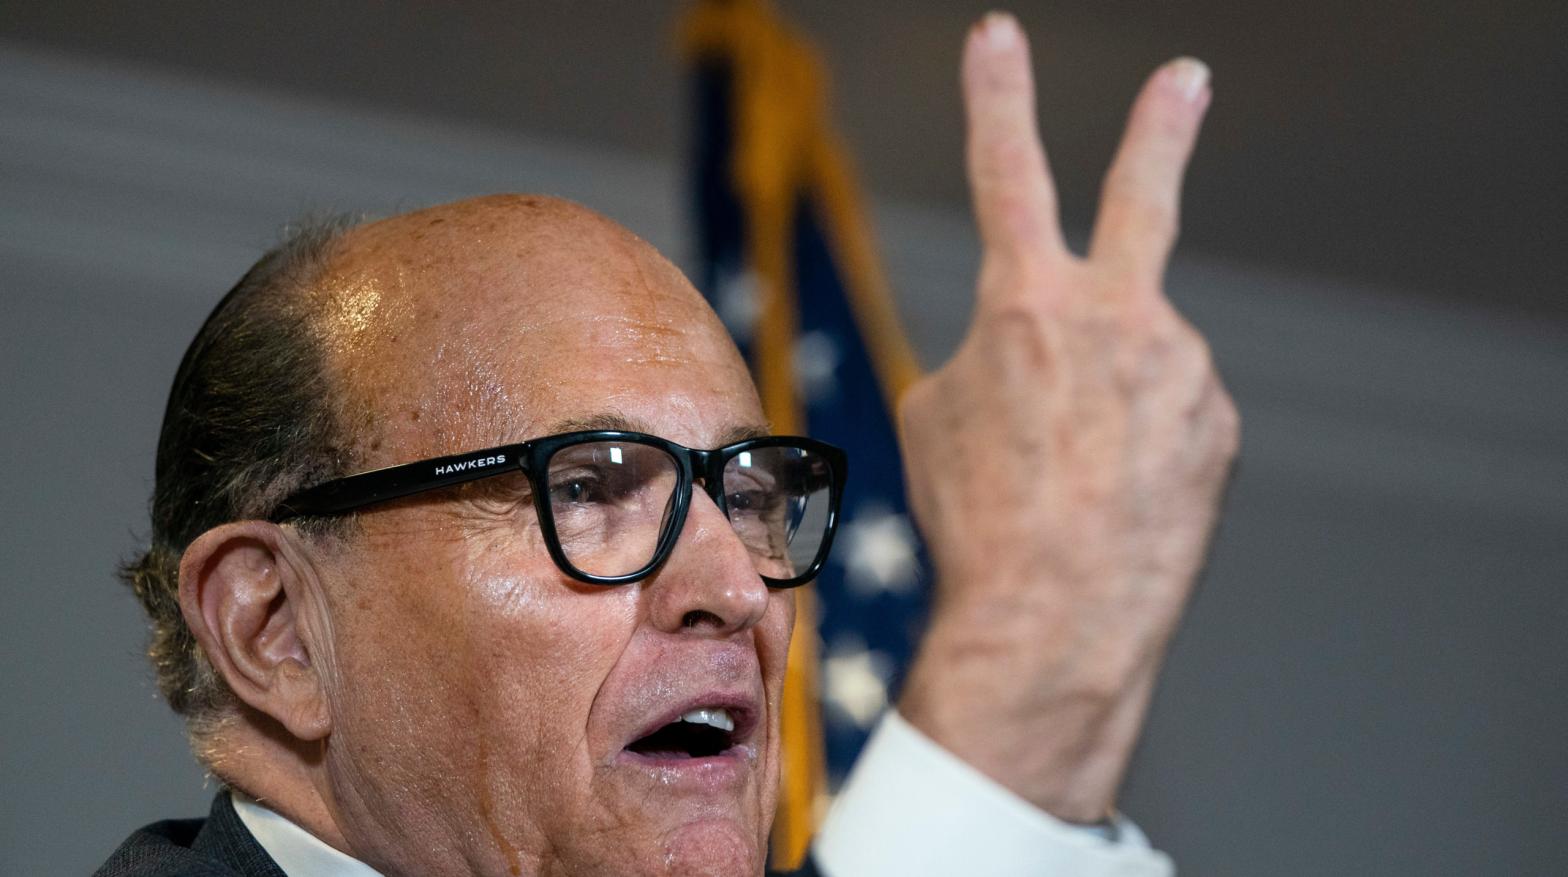 Rudy Giuliani accuses people of voting twice as he speaks to the press about various lawsuits related to the 2020 election, inside the Republican National Committee headquarters on November 19, 2020. (Photo: Drew Angerer, Getty Images)